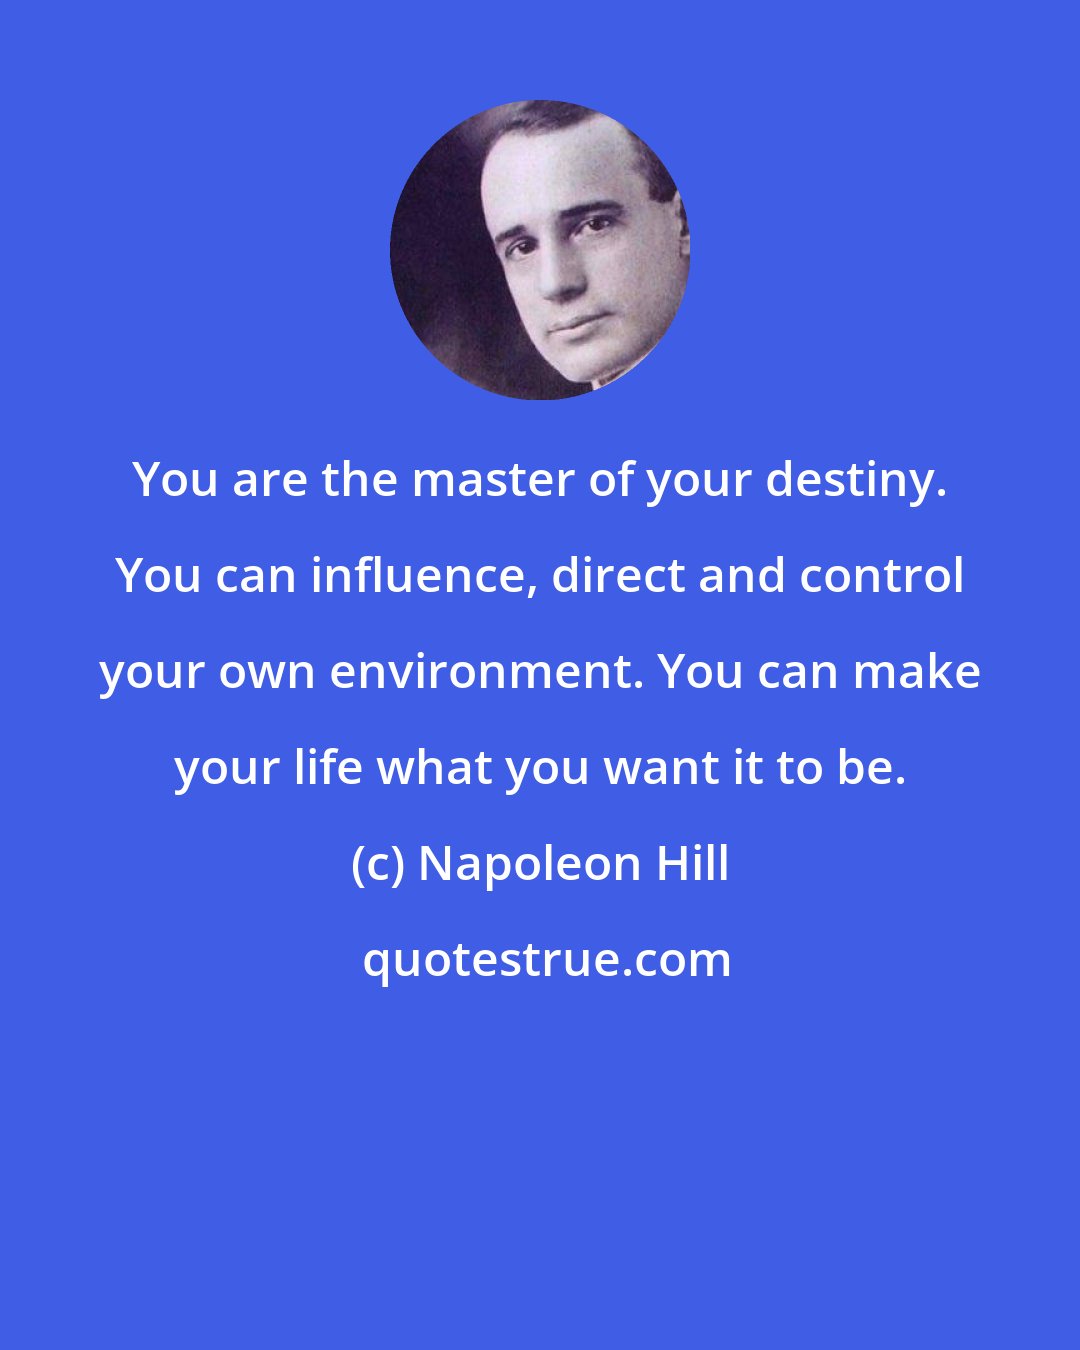 Napoleon Hill: You are the master of your destiny. You can influence, direct and control your own environment. You can make your life what you want it to be.